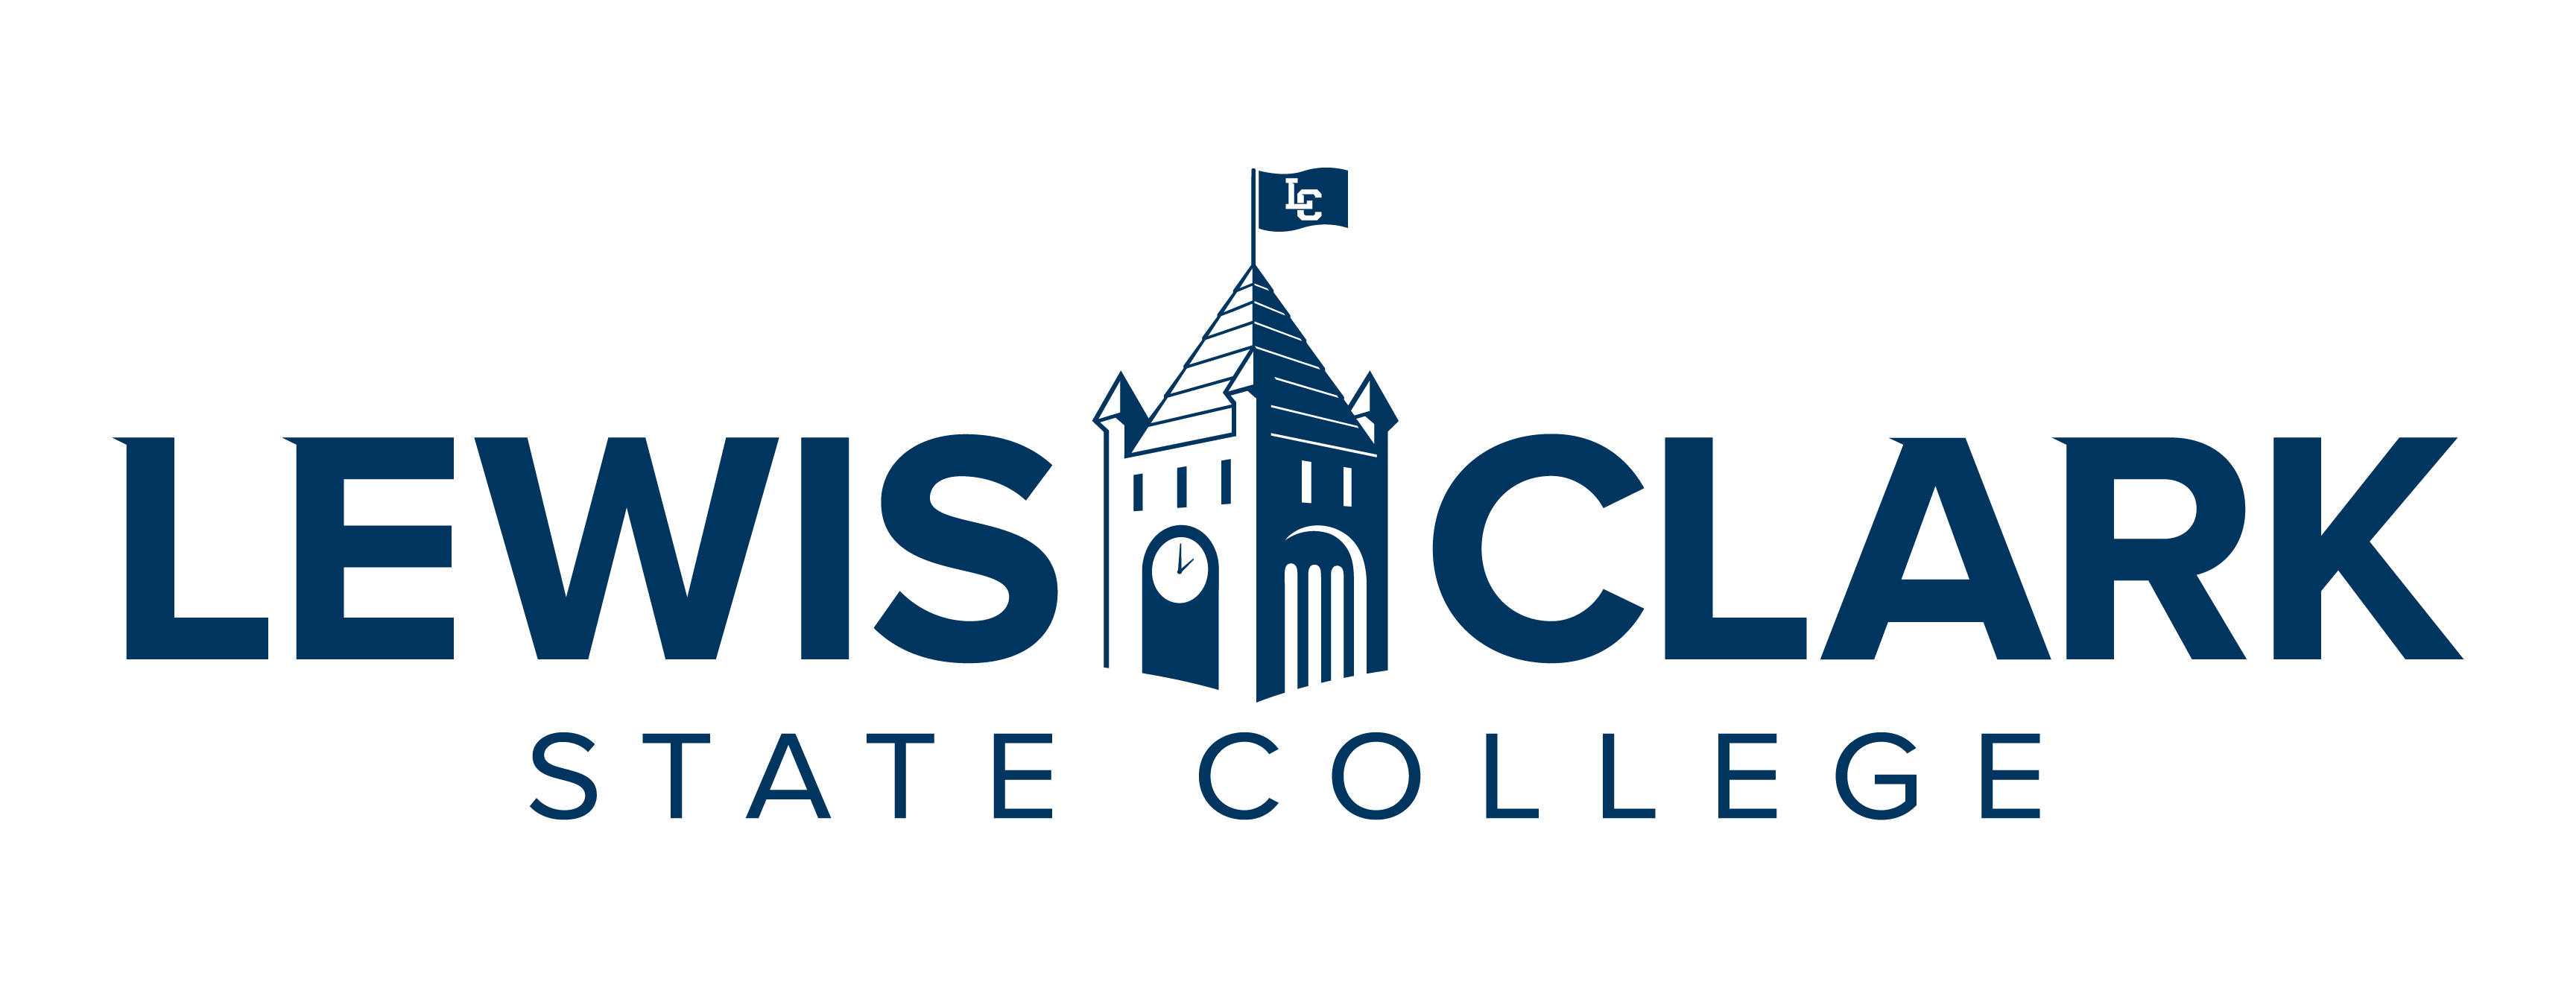 Image of Lewis and Clark State College's logo